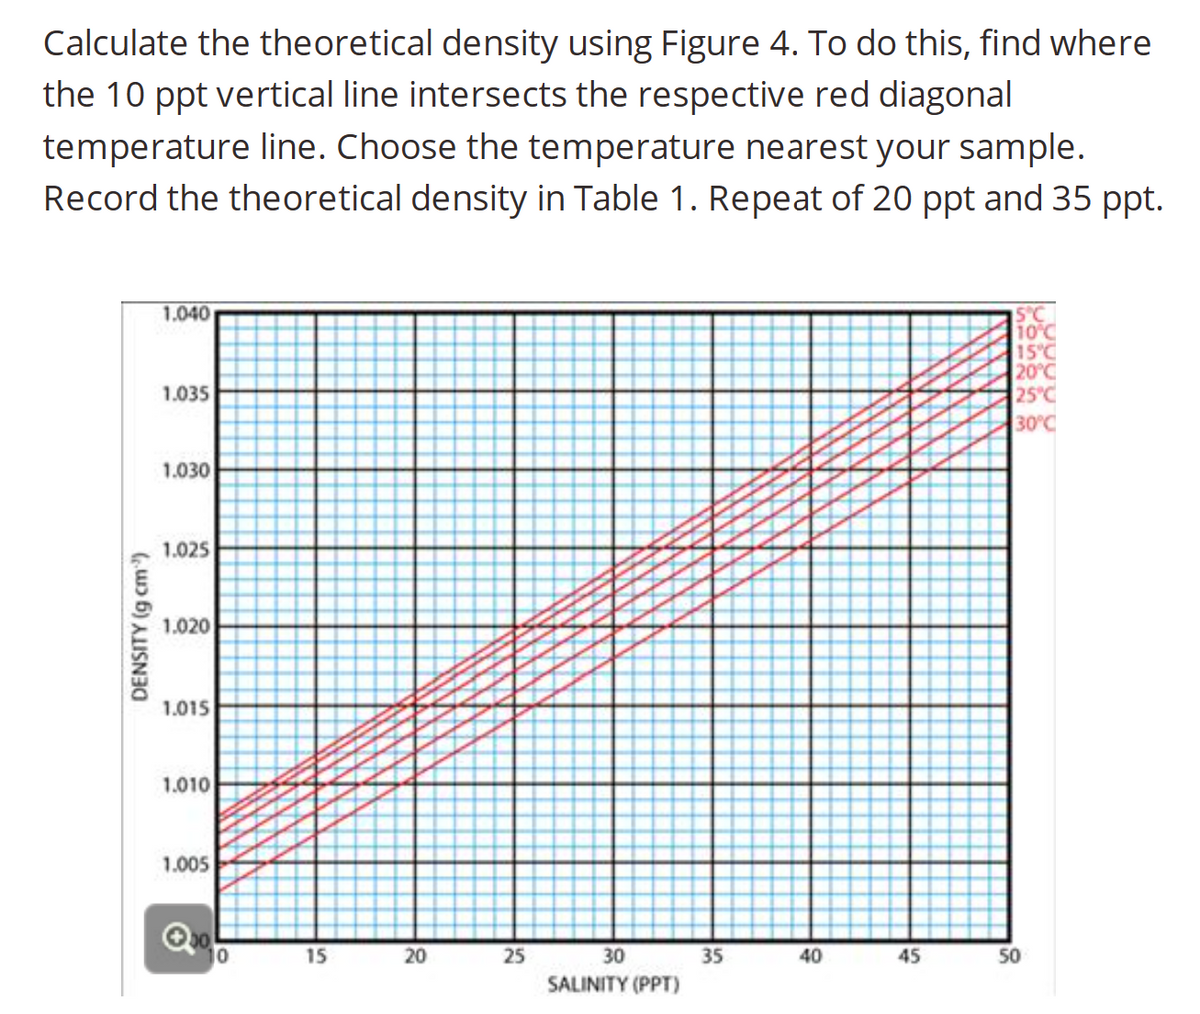 Calculate the theoretical density using Figure 4. To do this, find where
the 10 ppt vertical line intersects the respective red diagonal
temperature line. Choose the temperature nearest your sample.
Record the theoretical density in Table 1. Repeat of 20 ppt and 35 ppt.
DENSITY (g cm)
1.040
1.035
1.030
1.025
1.020
1.015
1.010
1.005
10
15
20
25
30
SALINITY (PPT)
35
40
45
15°C
10°C
15°C
20°C
25°C
30°C
50